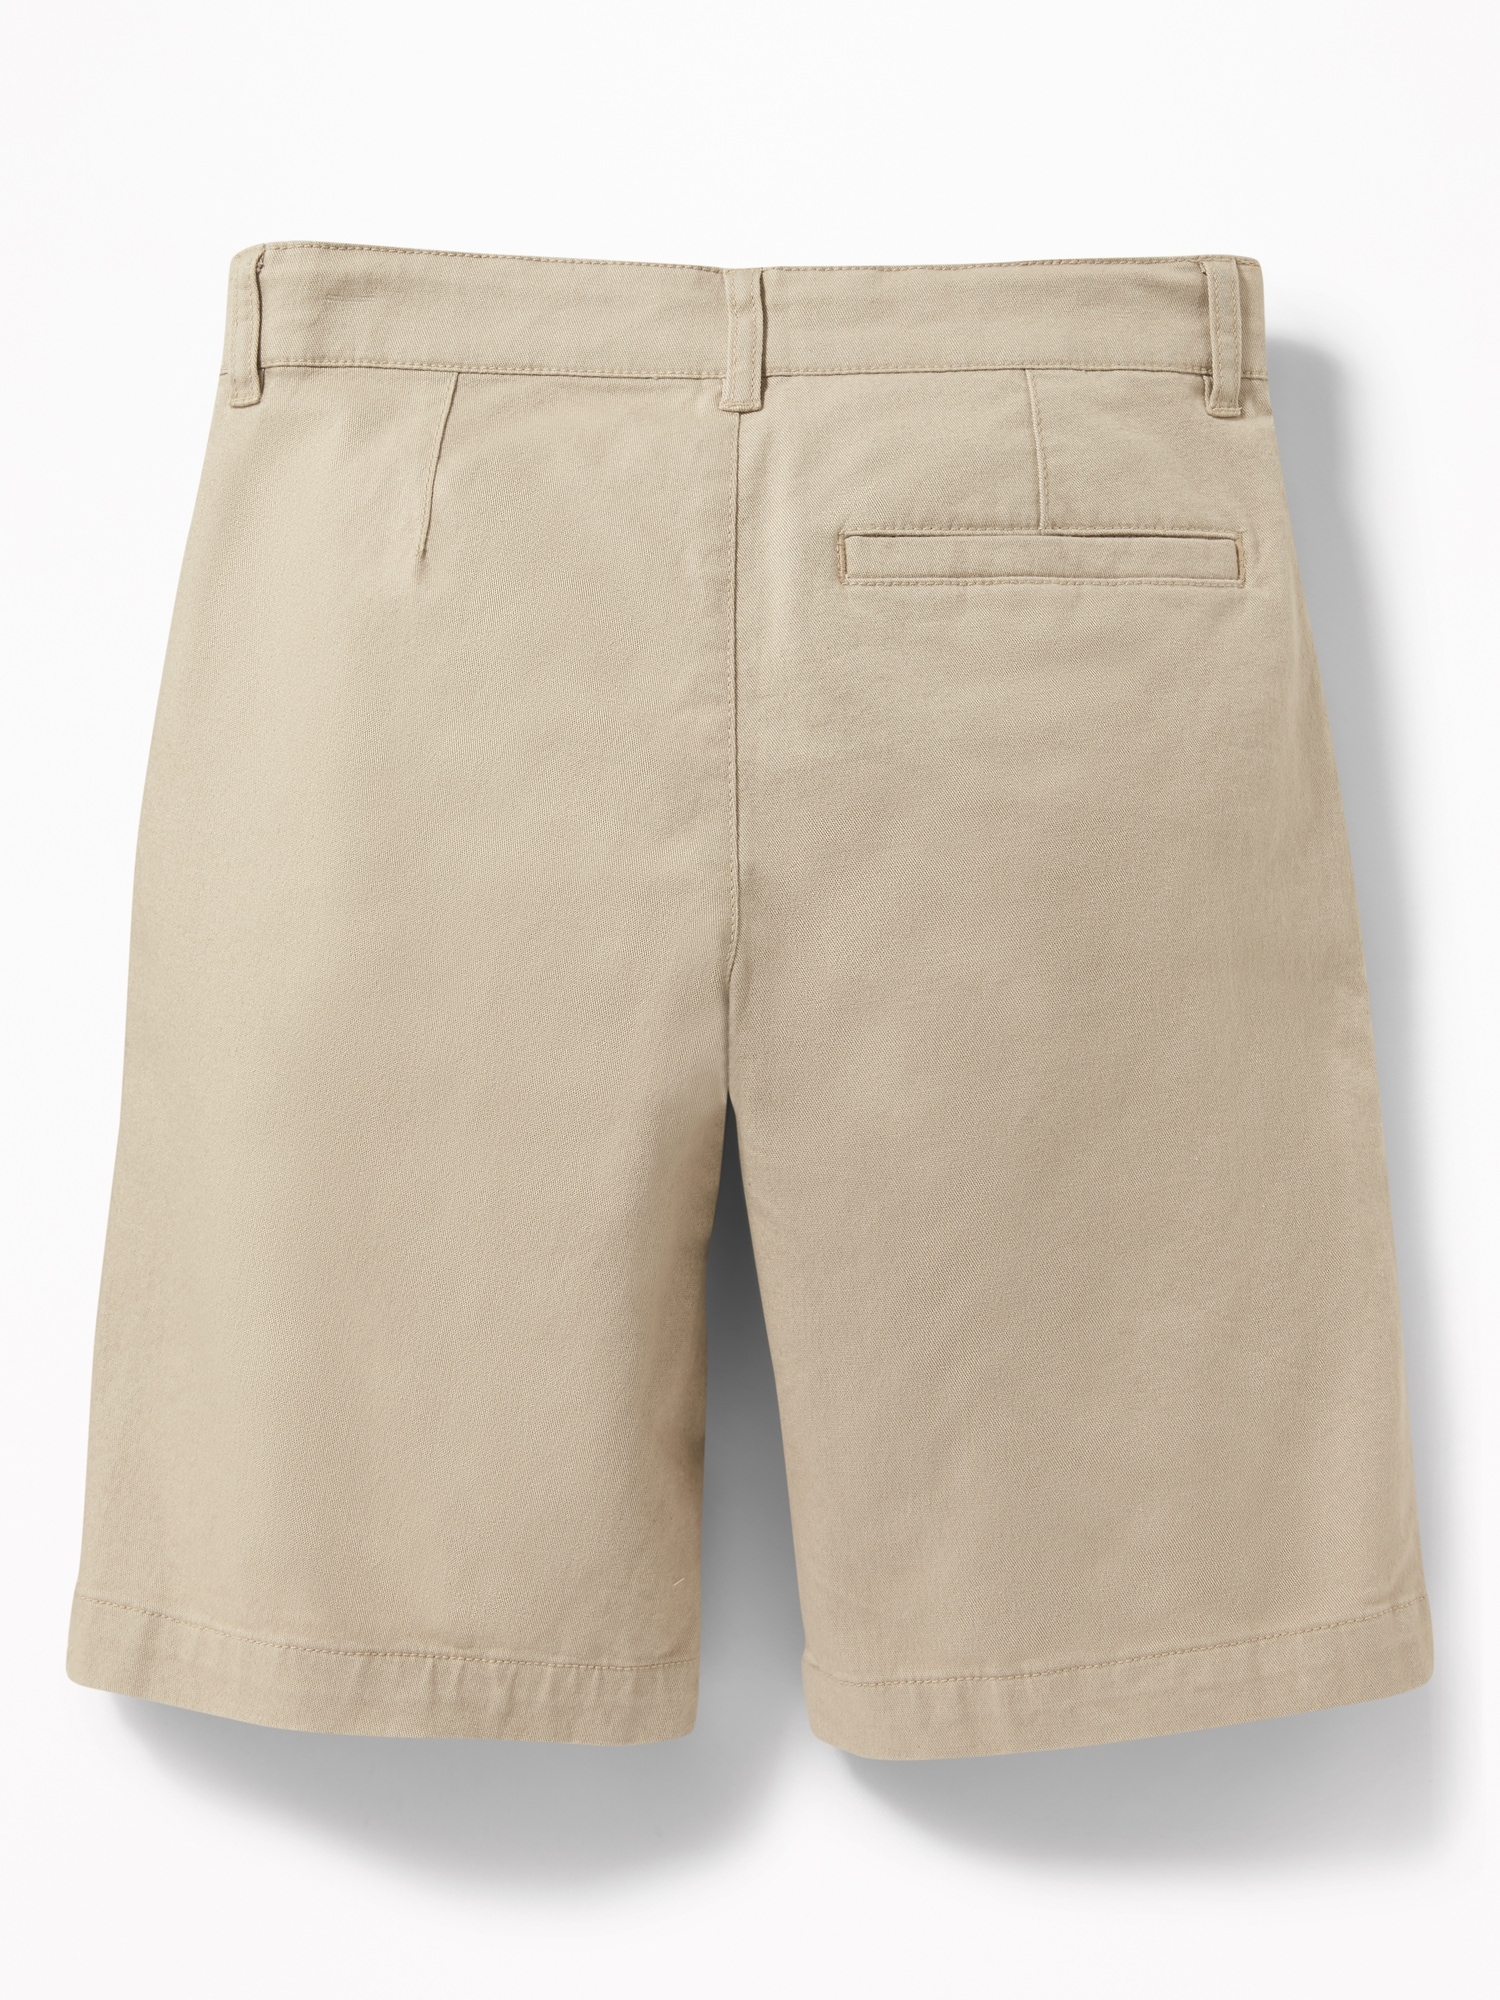 Built-In Flex Twill Shorts For Boys | Old Navy